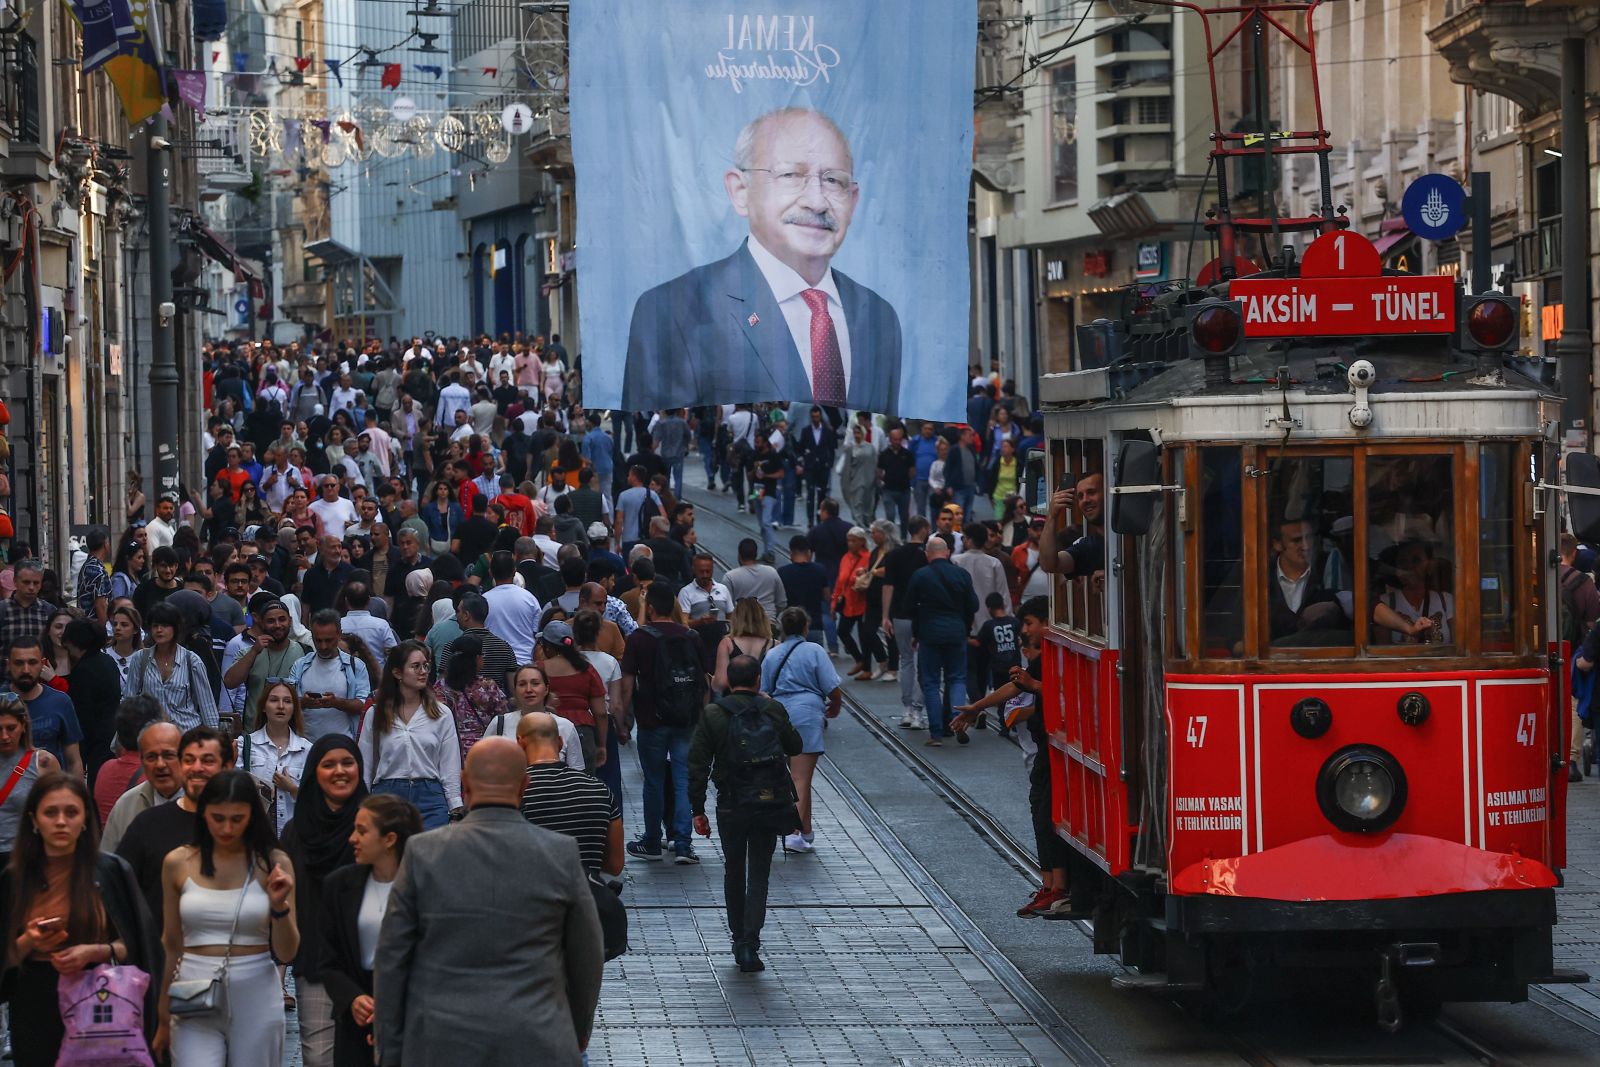 epaselect epa10655861 The nostalgic tram passes under an election campaign poster of Turkish presidential candidate Kemal Kilicdaroglu, leader of the opposition Republican People's Party (CHP), at Istiklal Street in Istanbul, Turkey, 26 May 2023. General elections had been held in Turkey on 14 May, where none of the candidates exceeded the 50 percent mark in the first round. The second round of presidential elections between Turkish President Recep Tayyip Erdogan and his challenger Kemal Kilicdaroglu, the leader of the opposition Republican People's Party (CHP), will be held on 28 May.  EPA/SEDAT SUNA